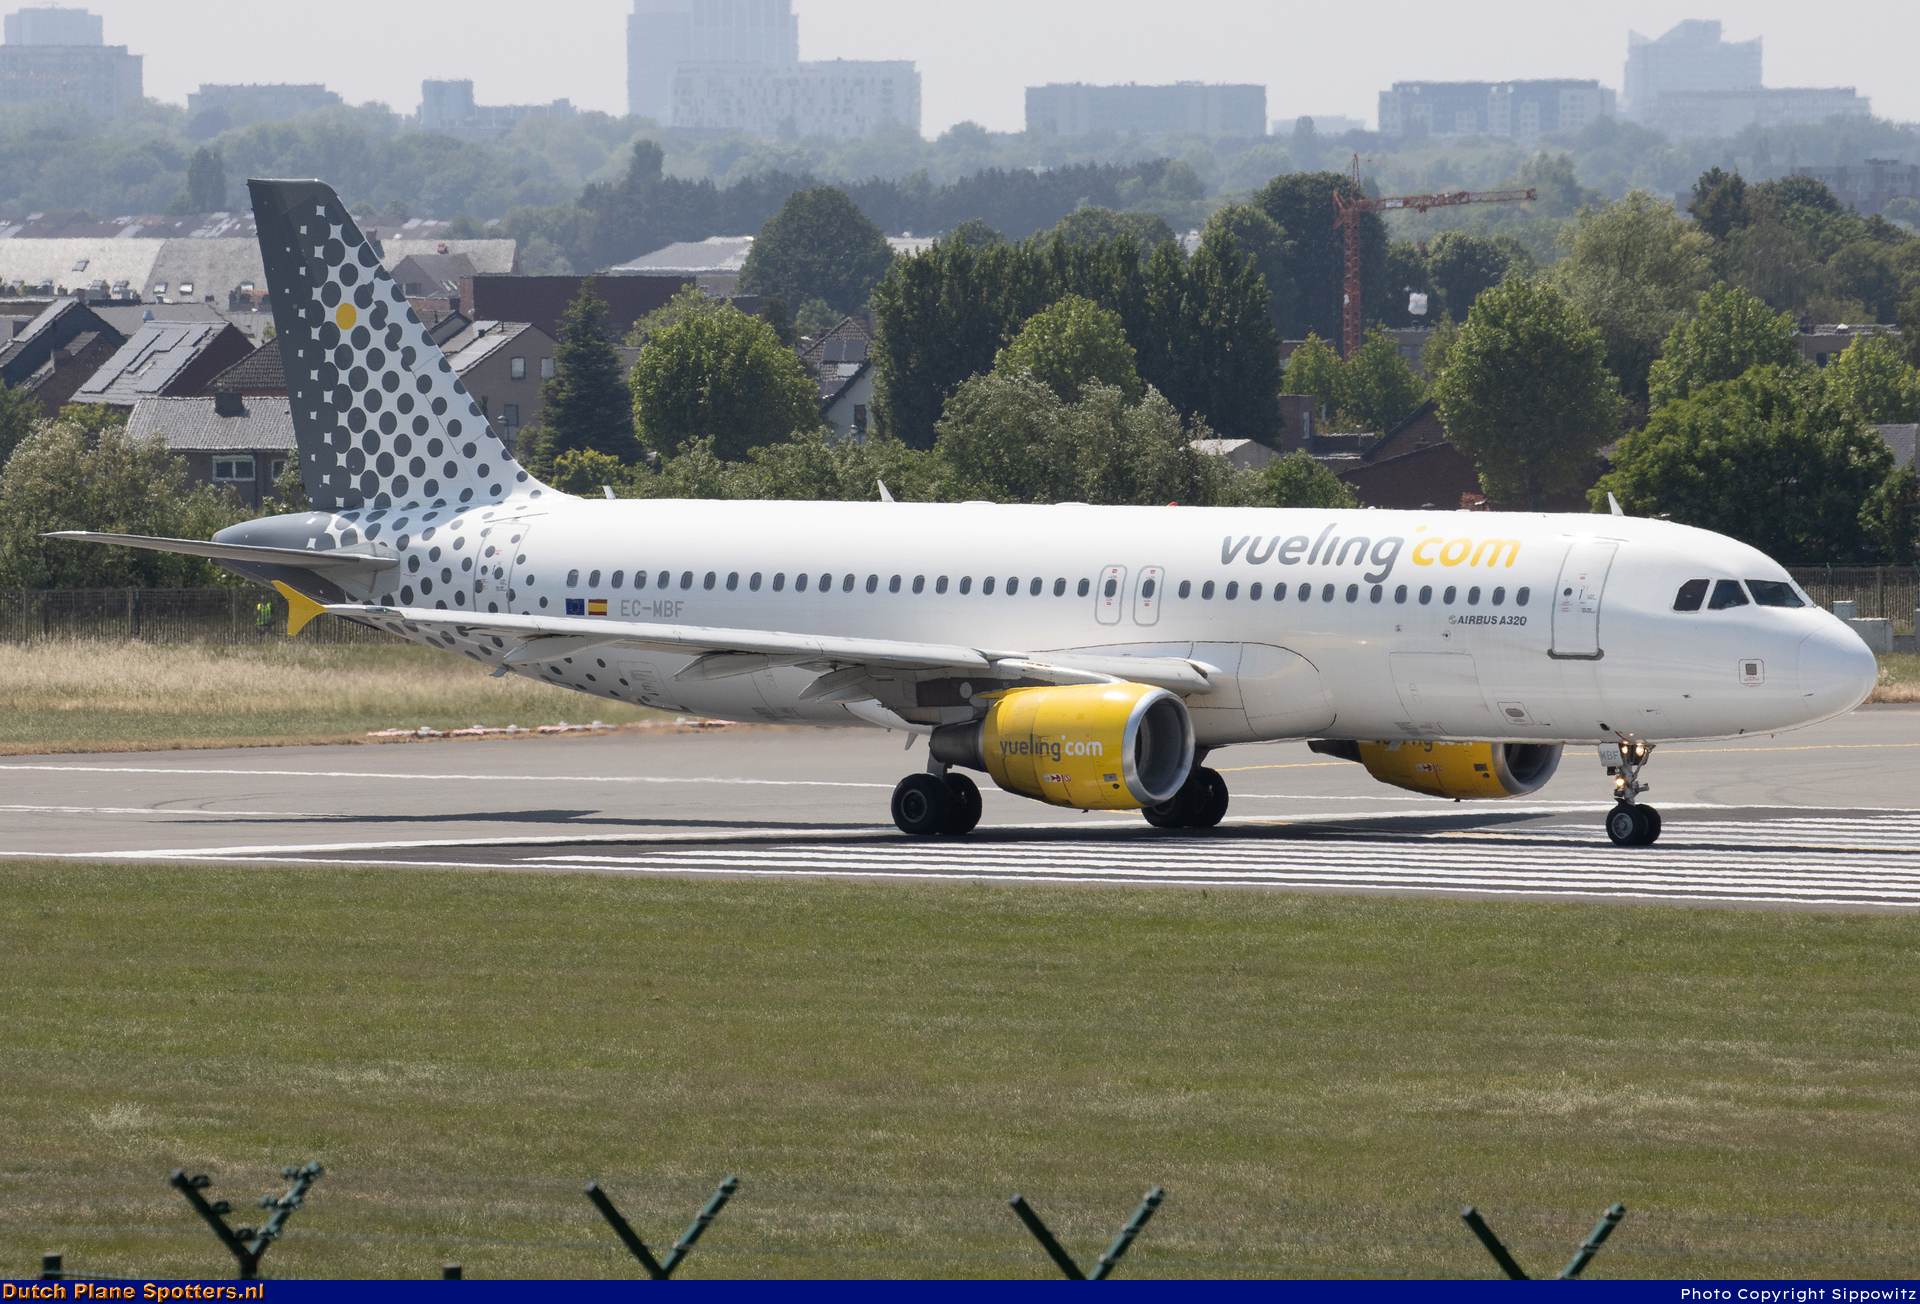 EC-MBF Airbus A320 Vueling.com by Sippowitz